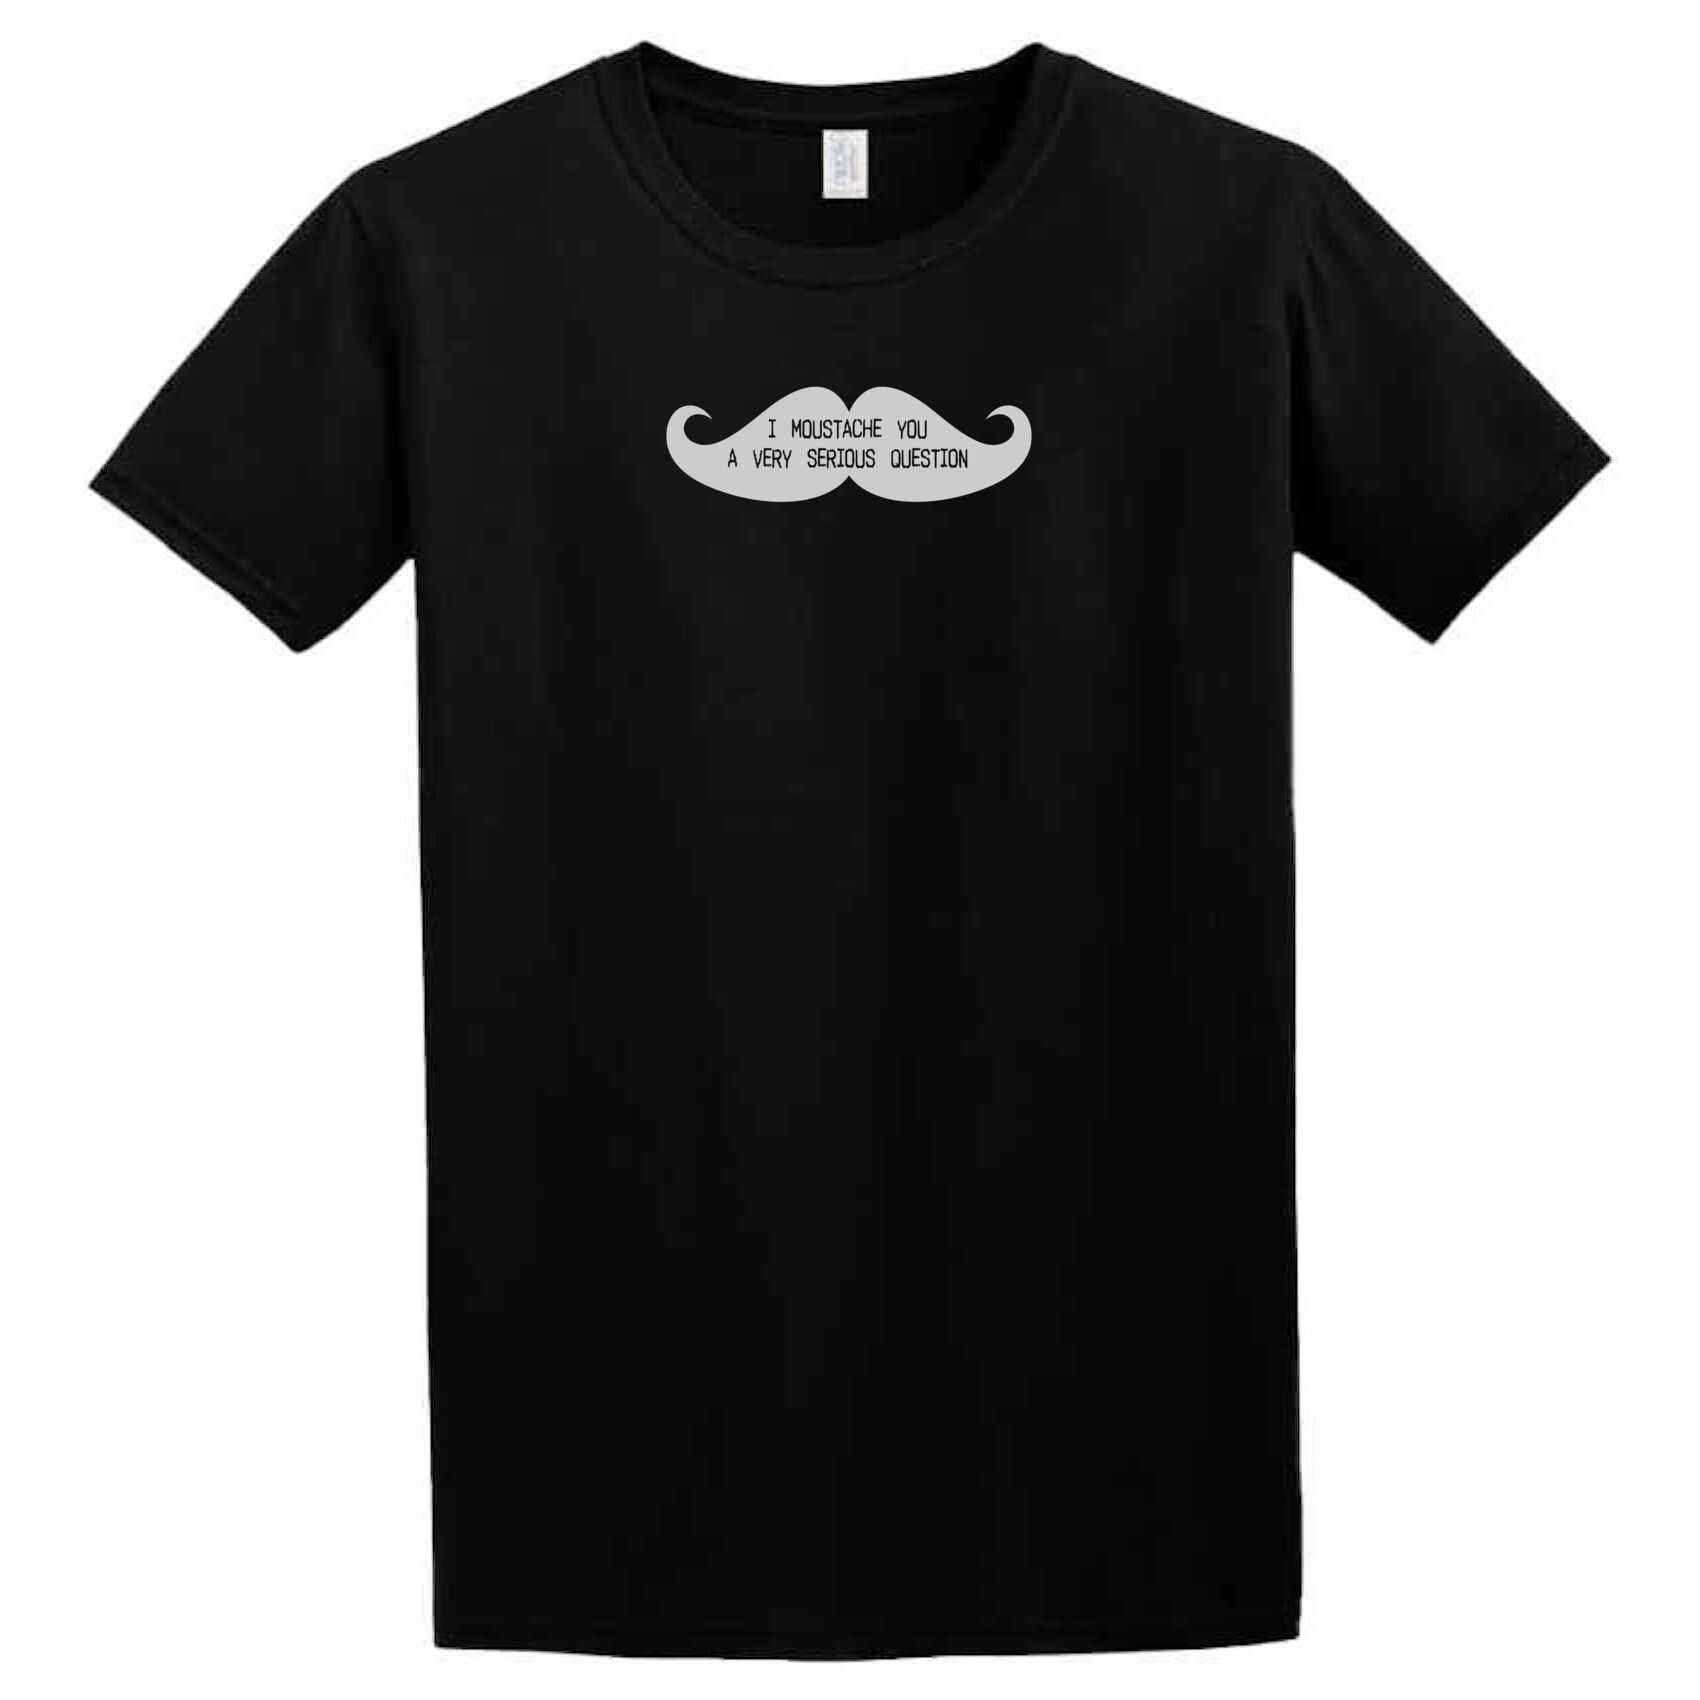 A Twisted Gifts Moustache T-Shirt.